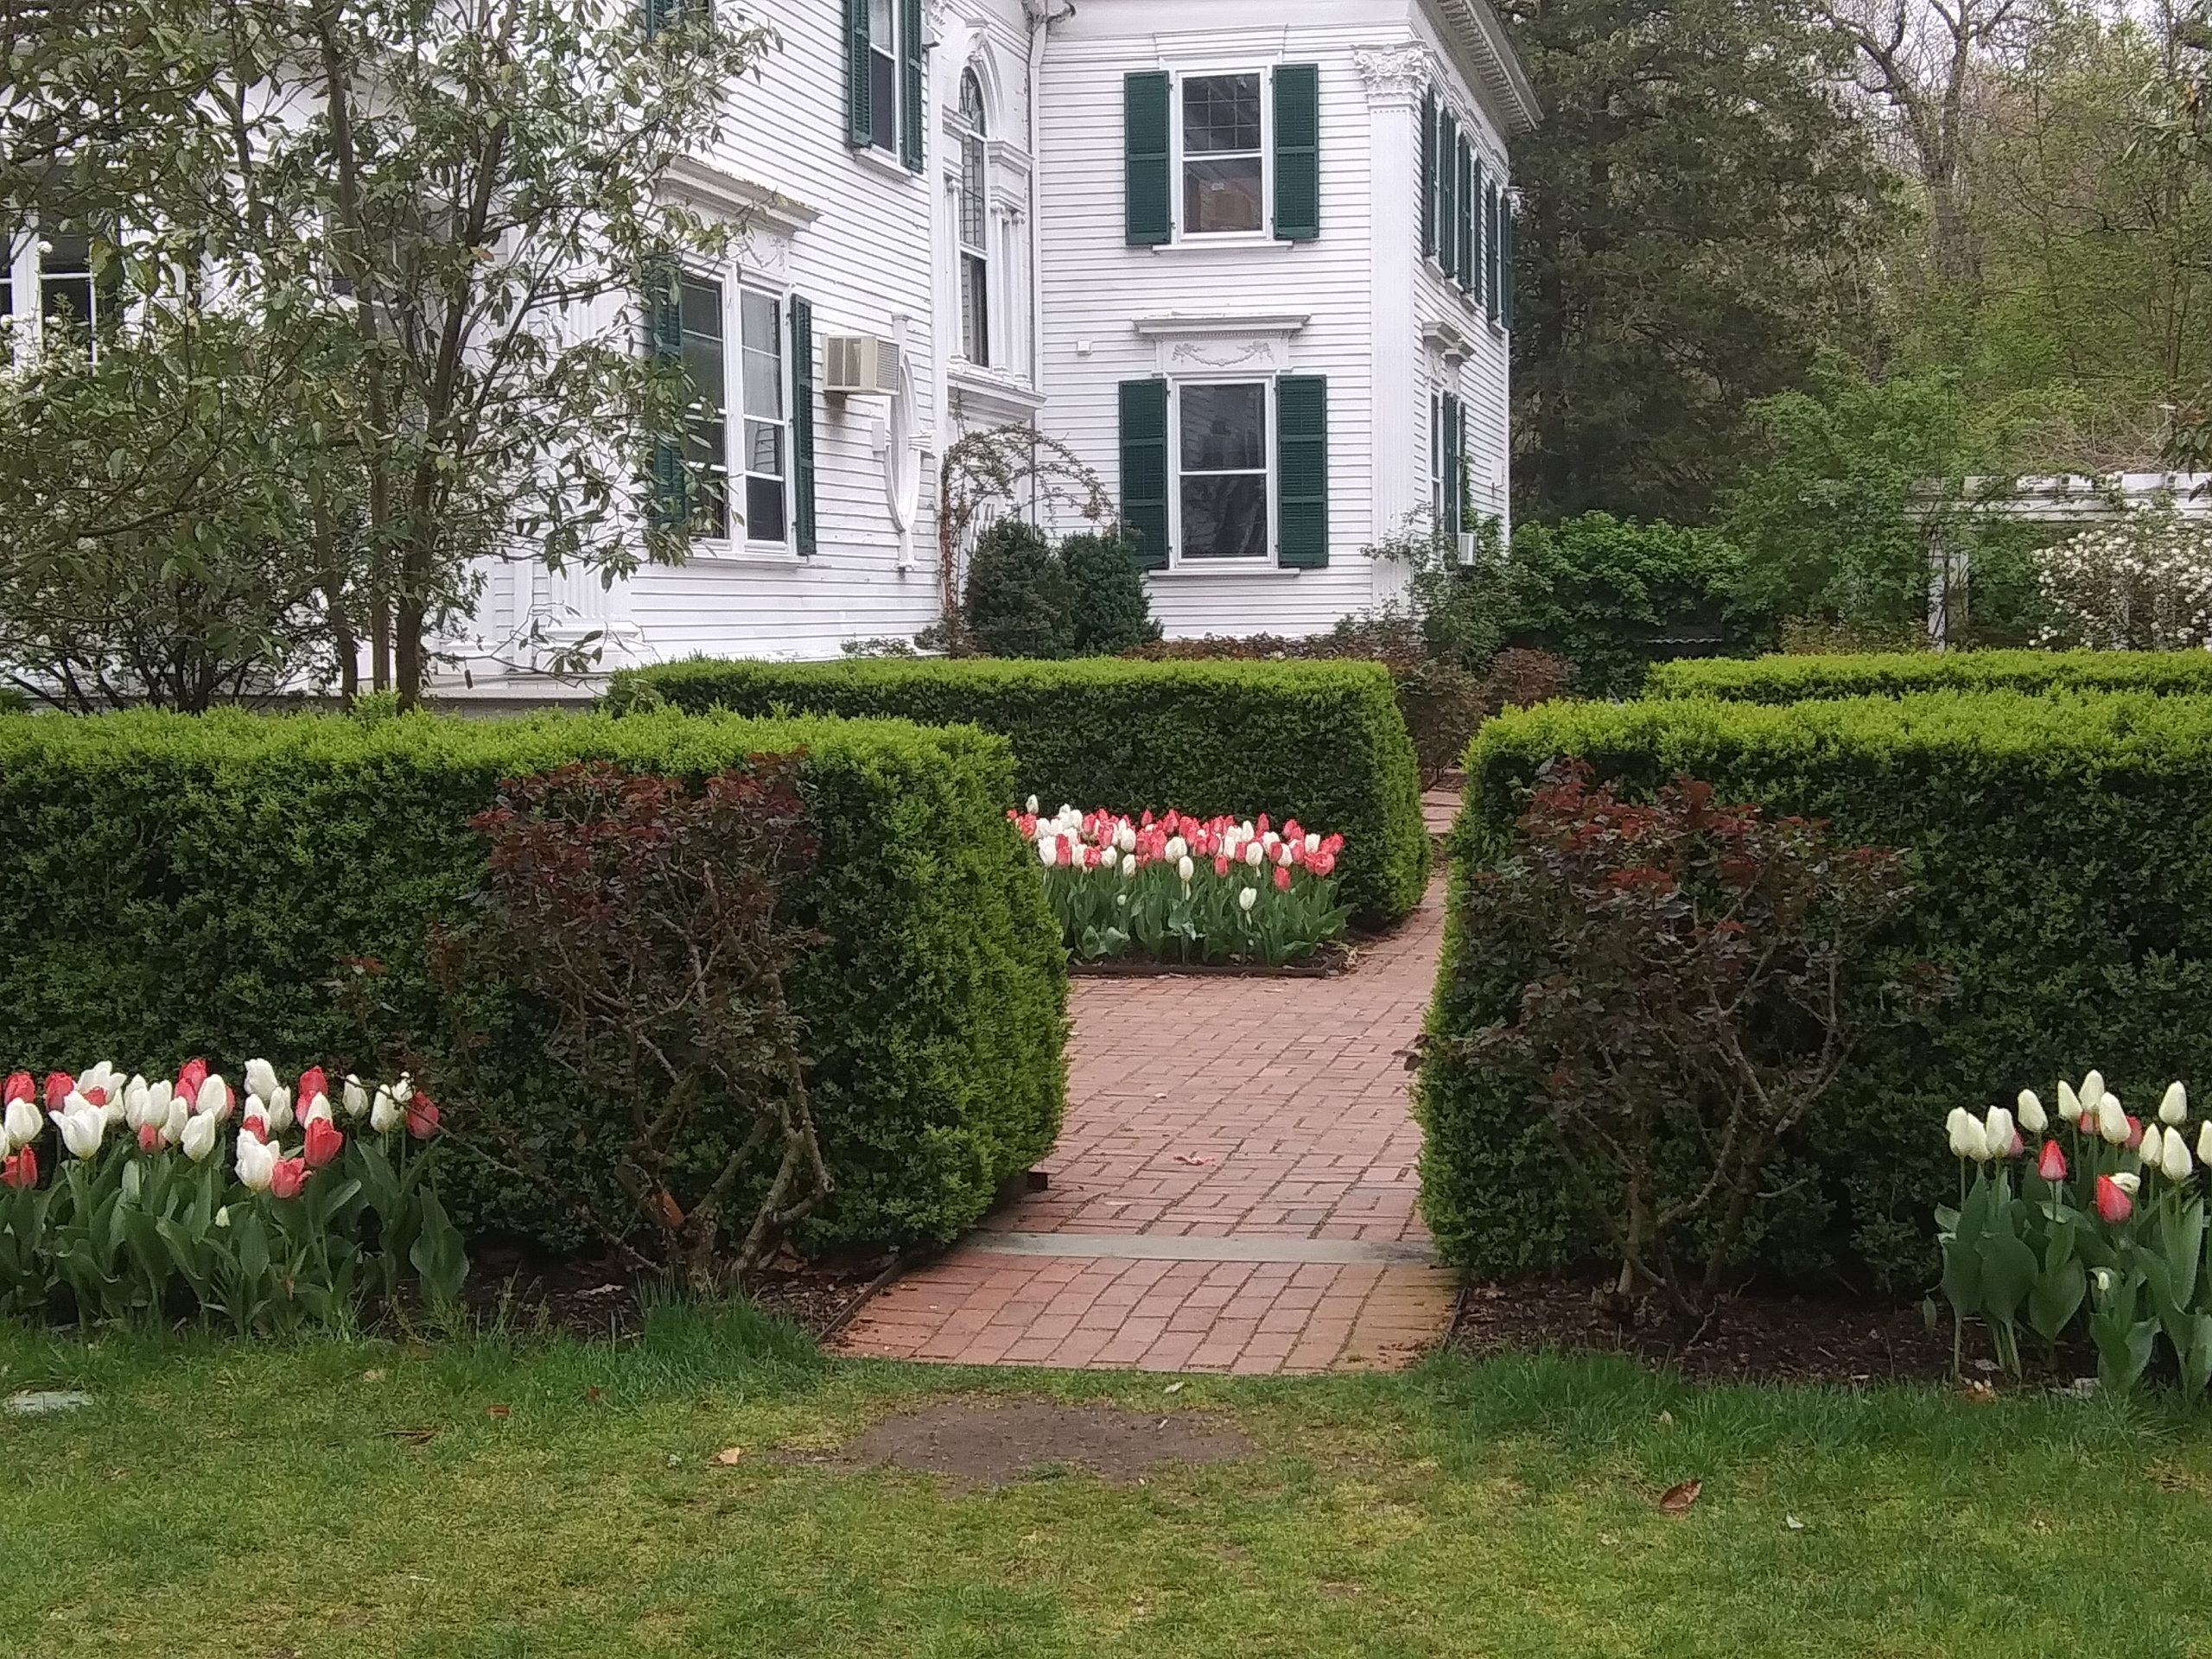 White house, hedges and tulips